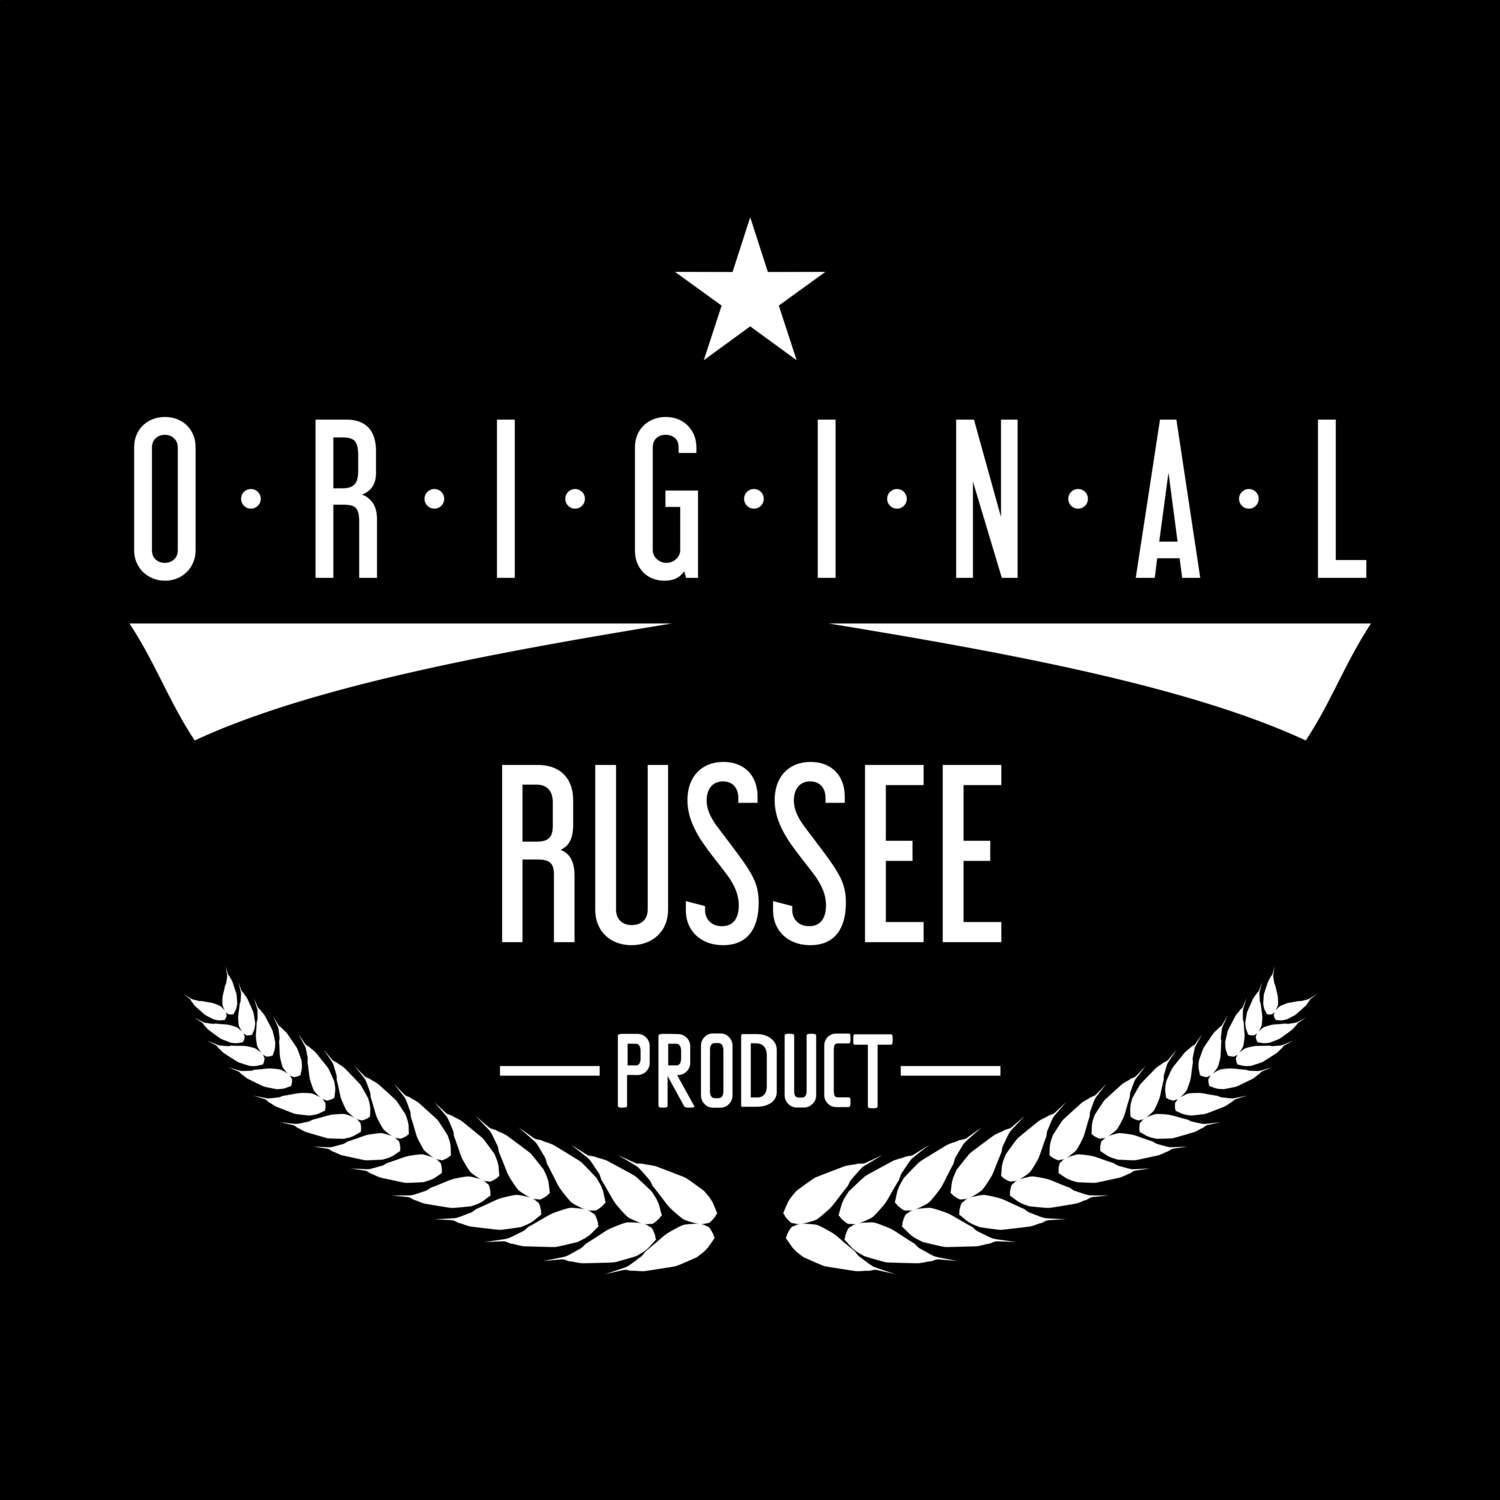 Russee T-Shirt »Original Product«